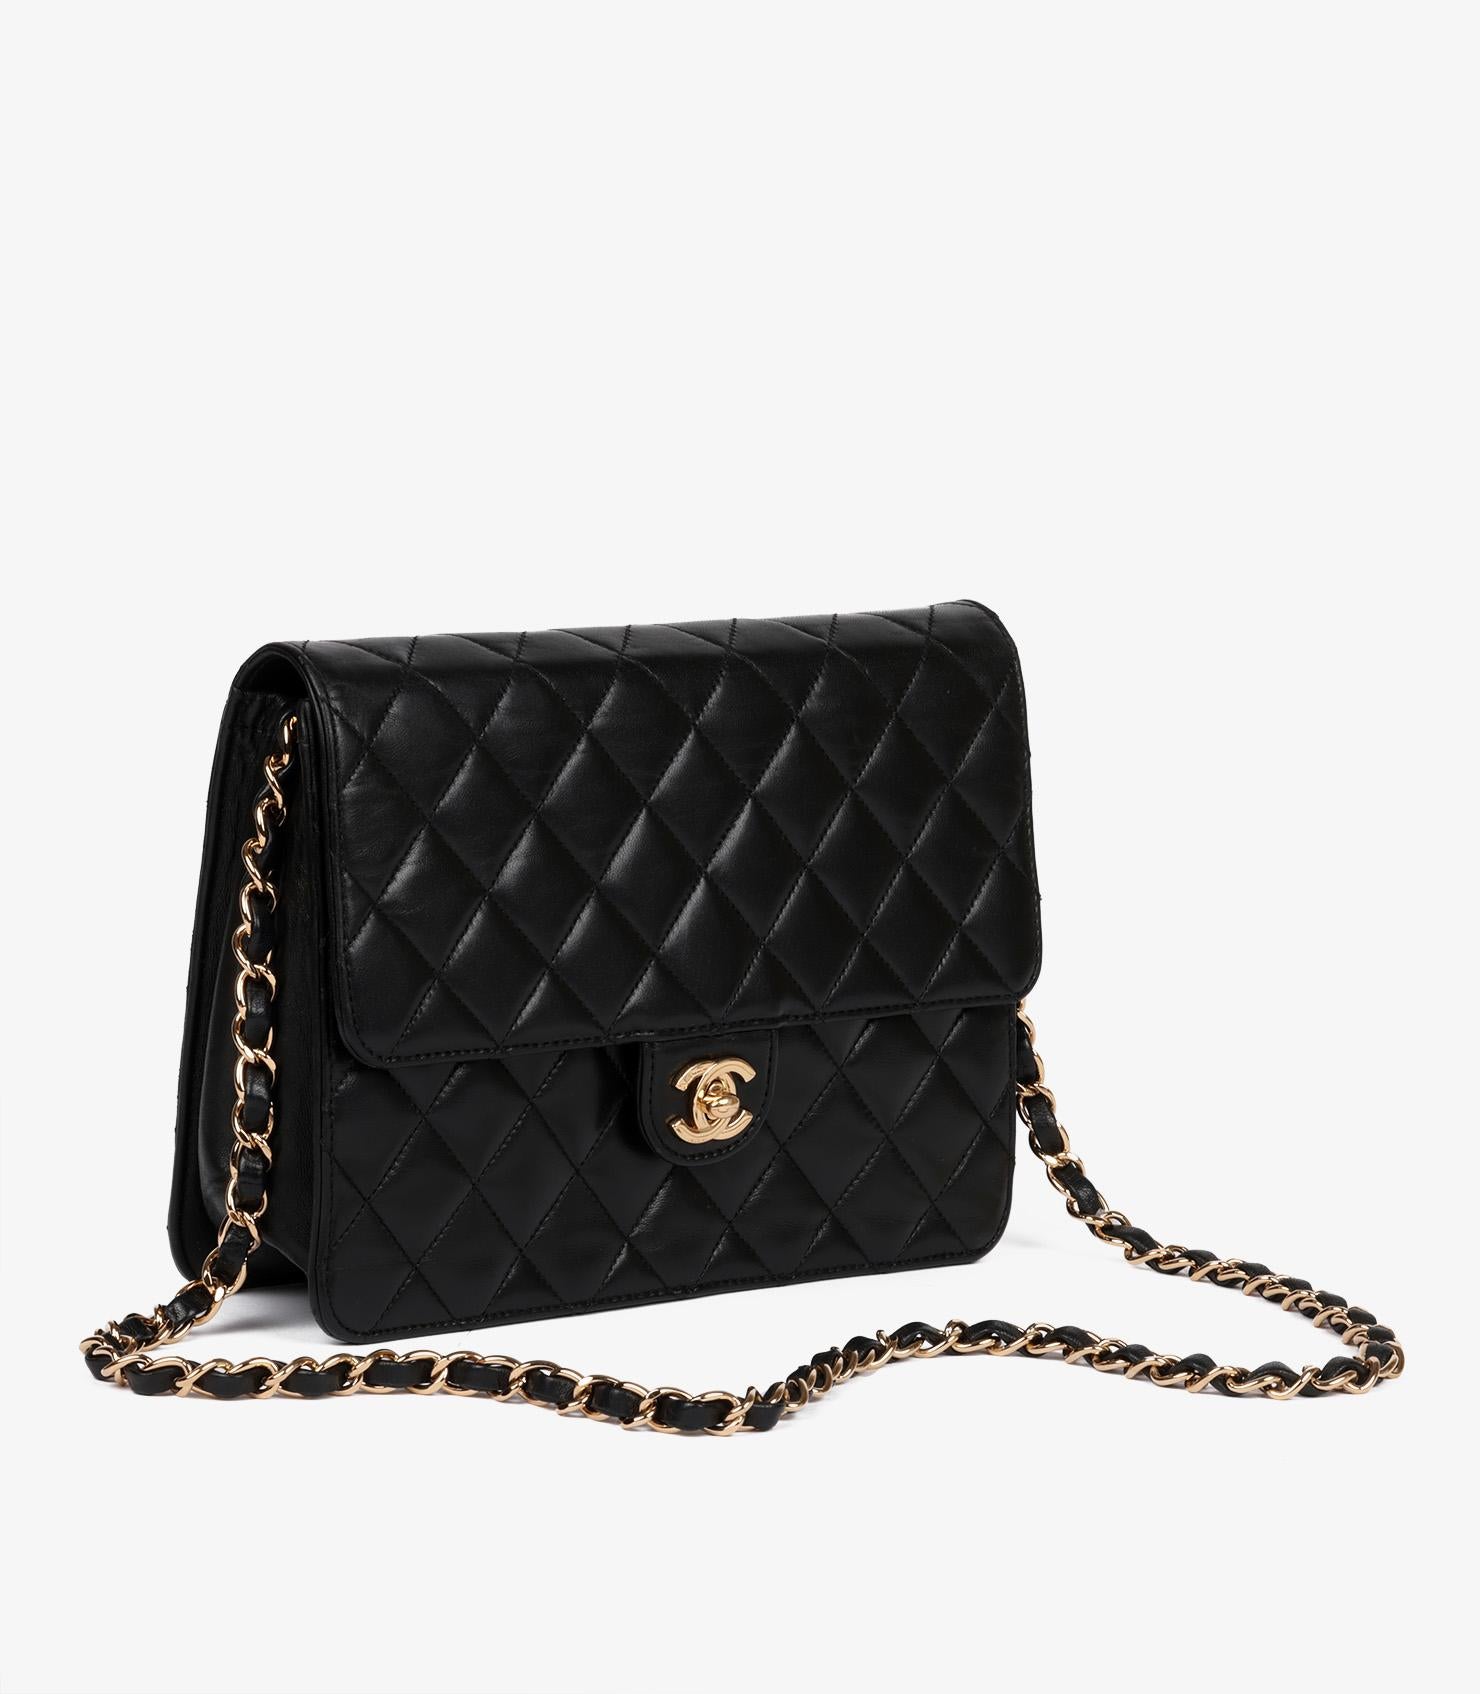 Chanel Black Quilted Lambskin Small Classic Single Flap Bag In Excellent Condition For Sale In Bishop's Stortford, Hertfordshire